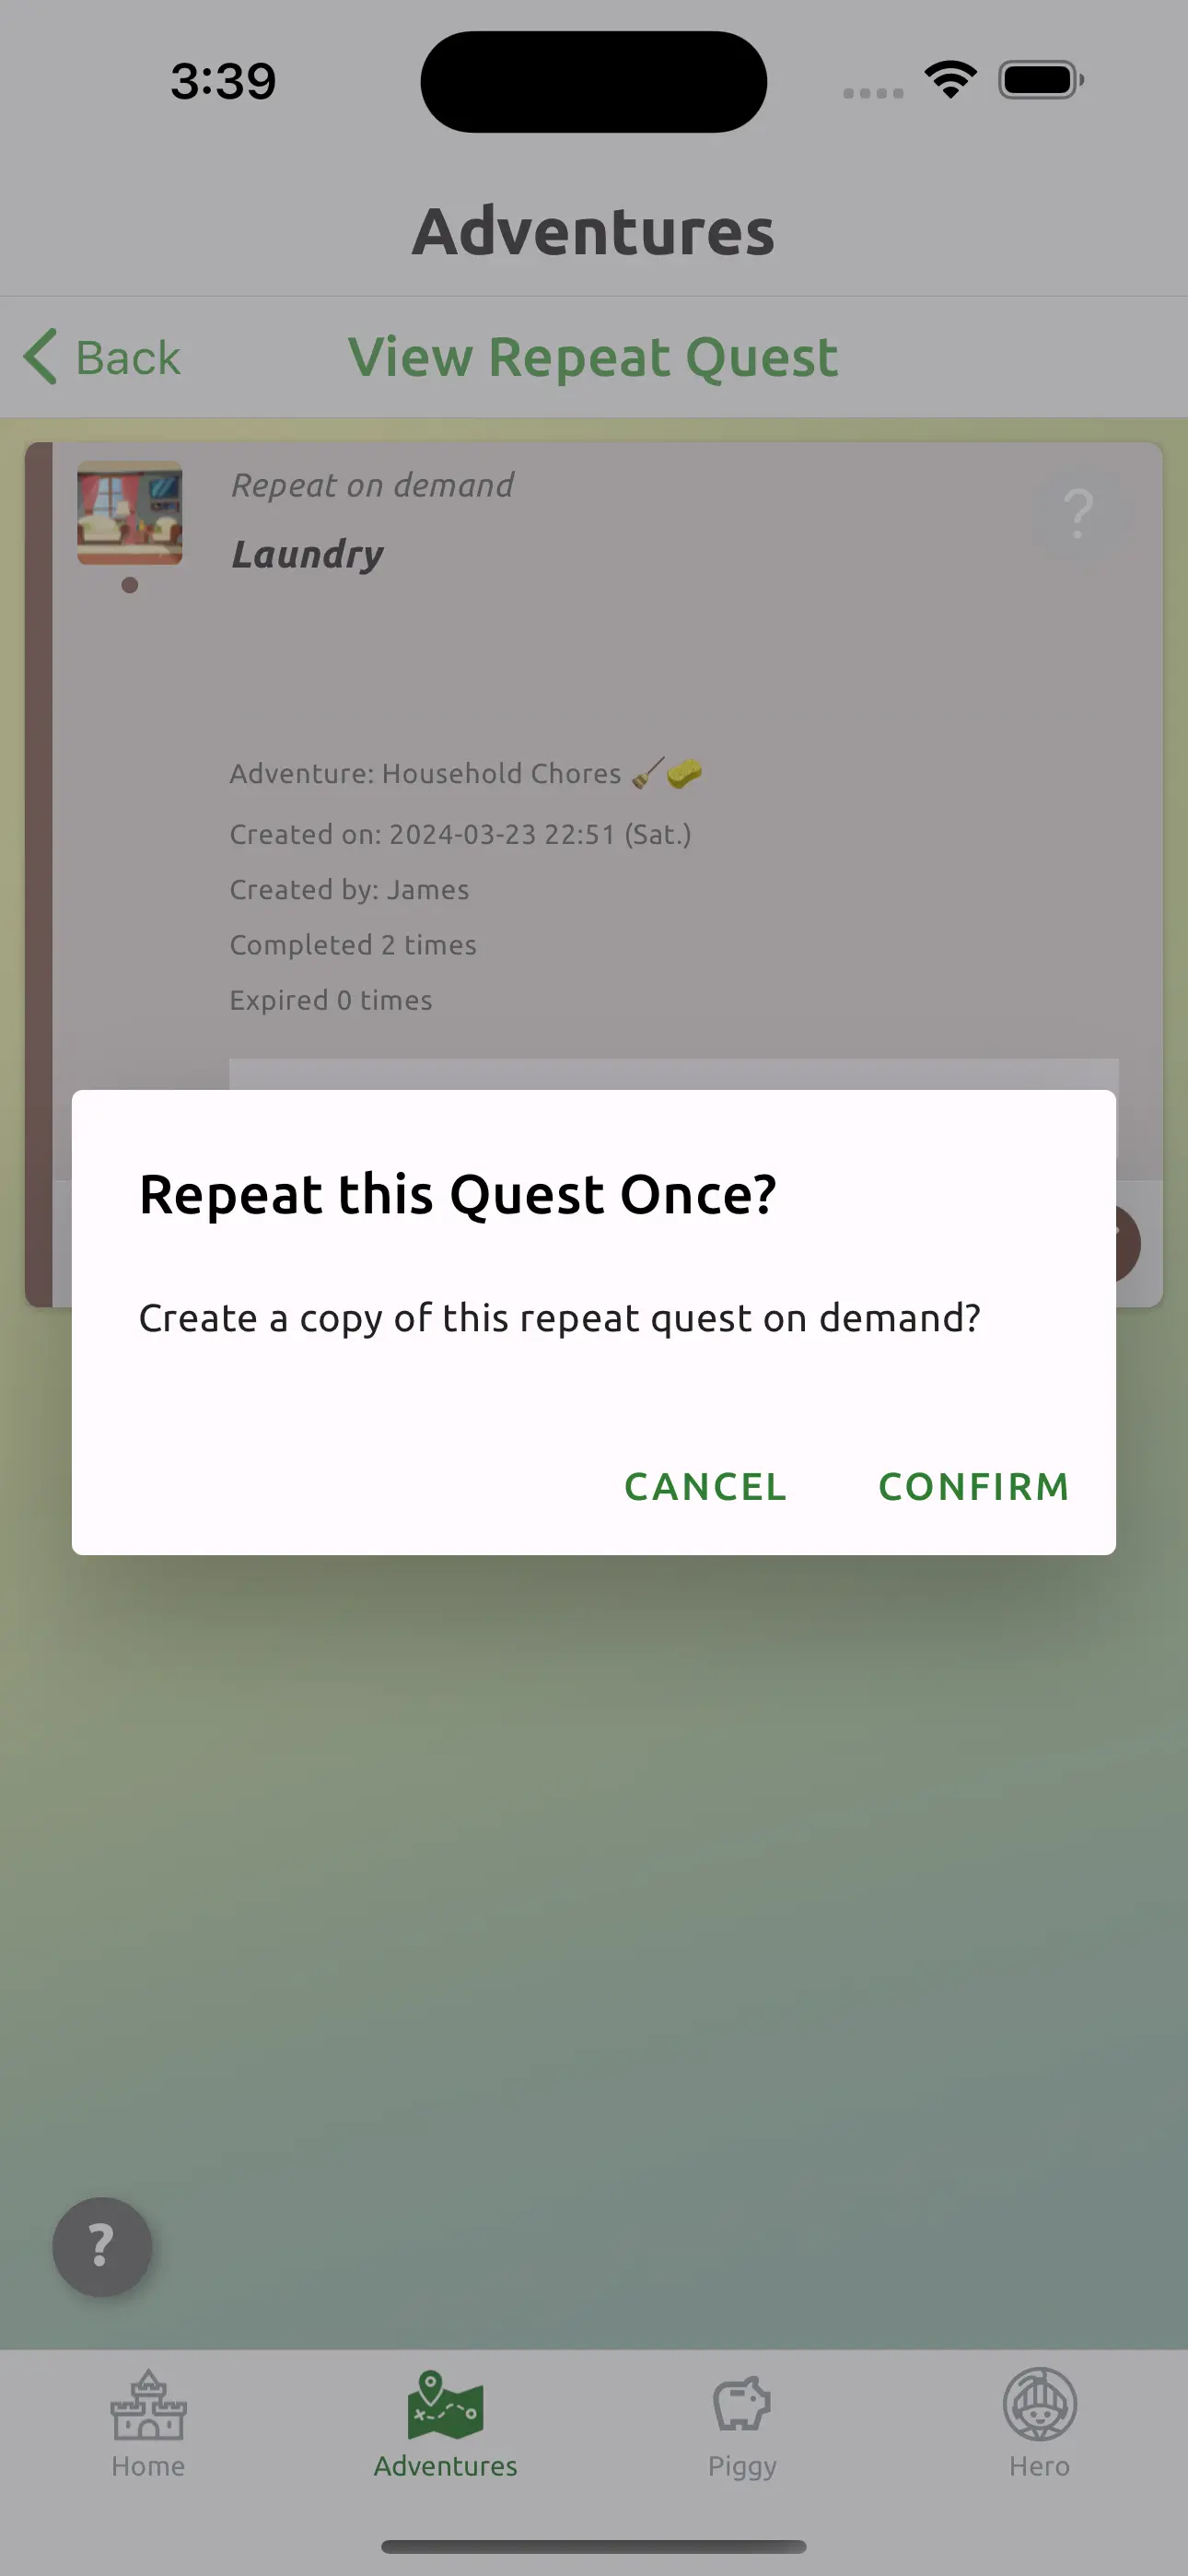 Prompt to confirm creation of a repeat quest on demand.